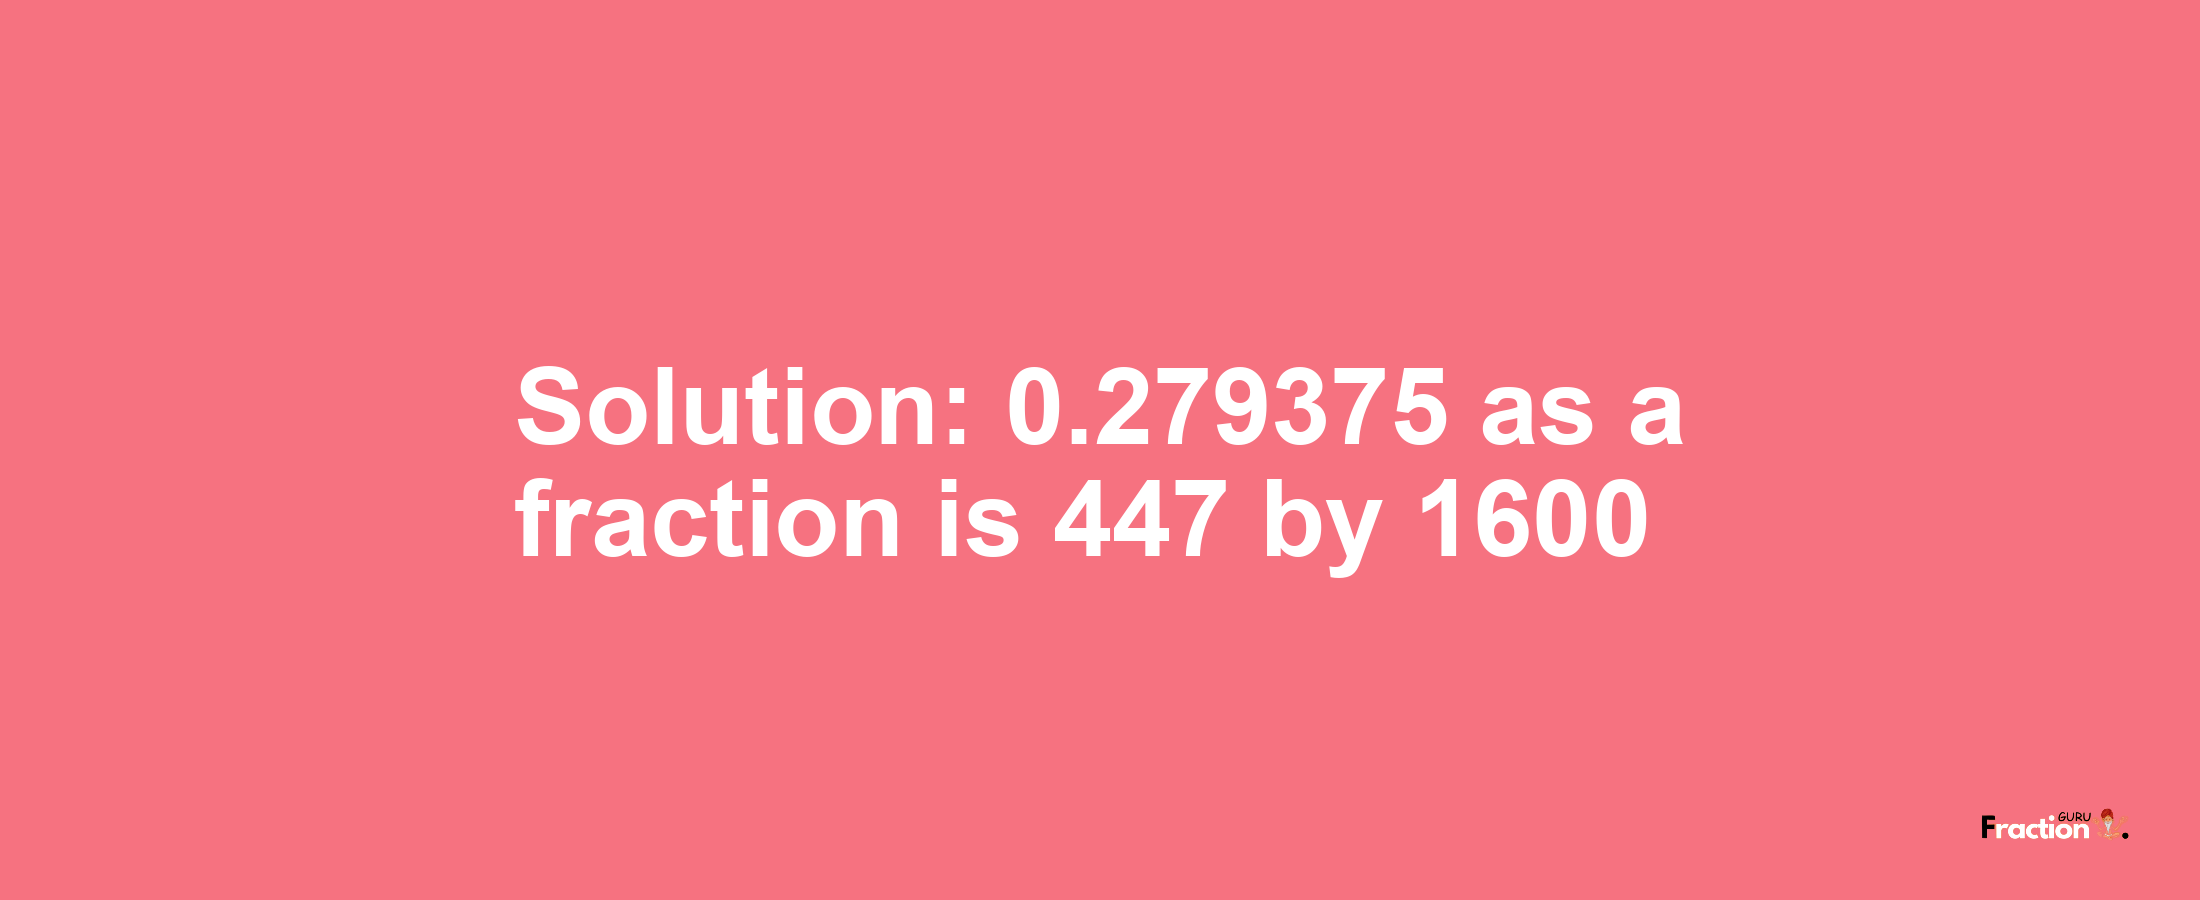 Solution:0.279375 as a fraction is 447/1600